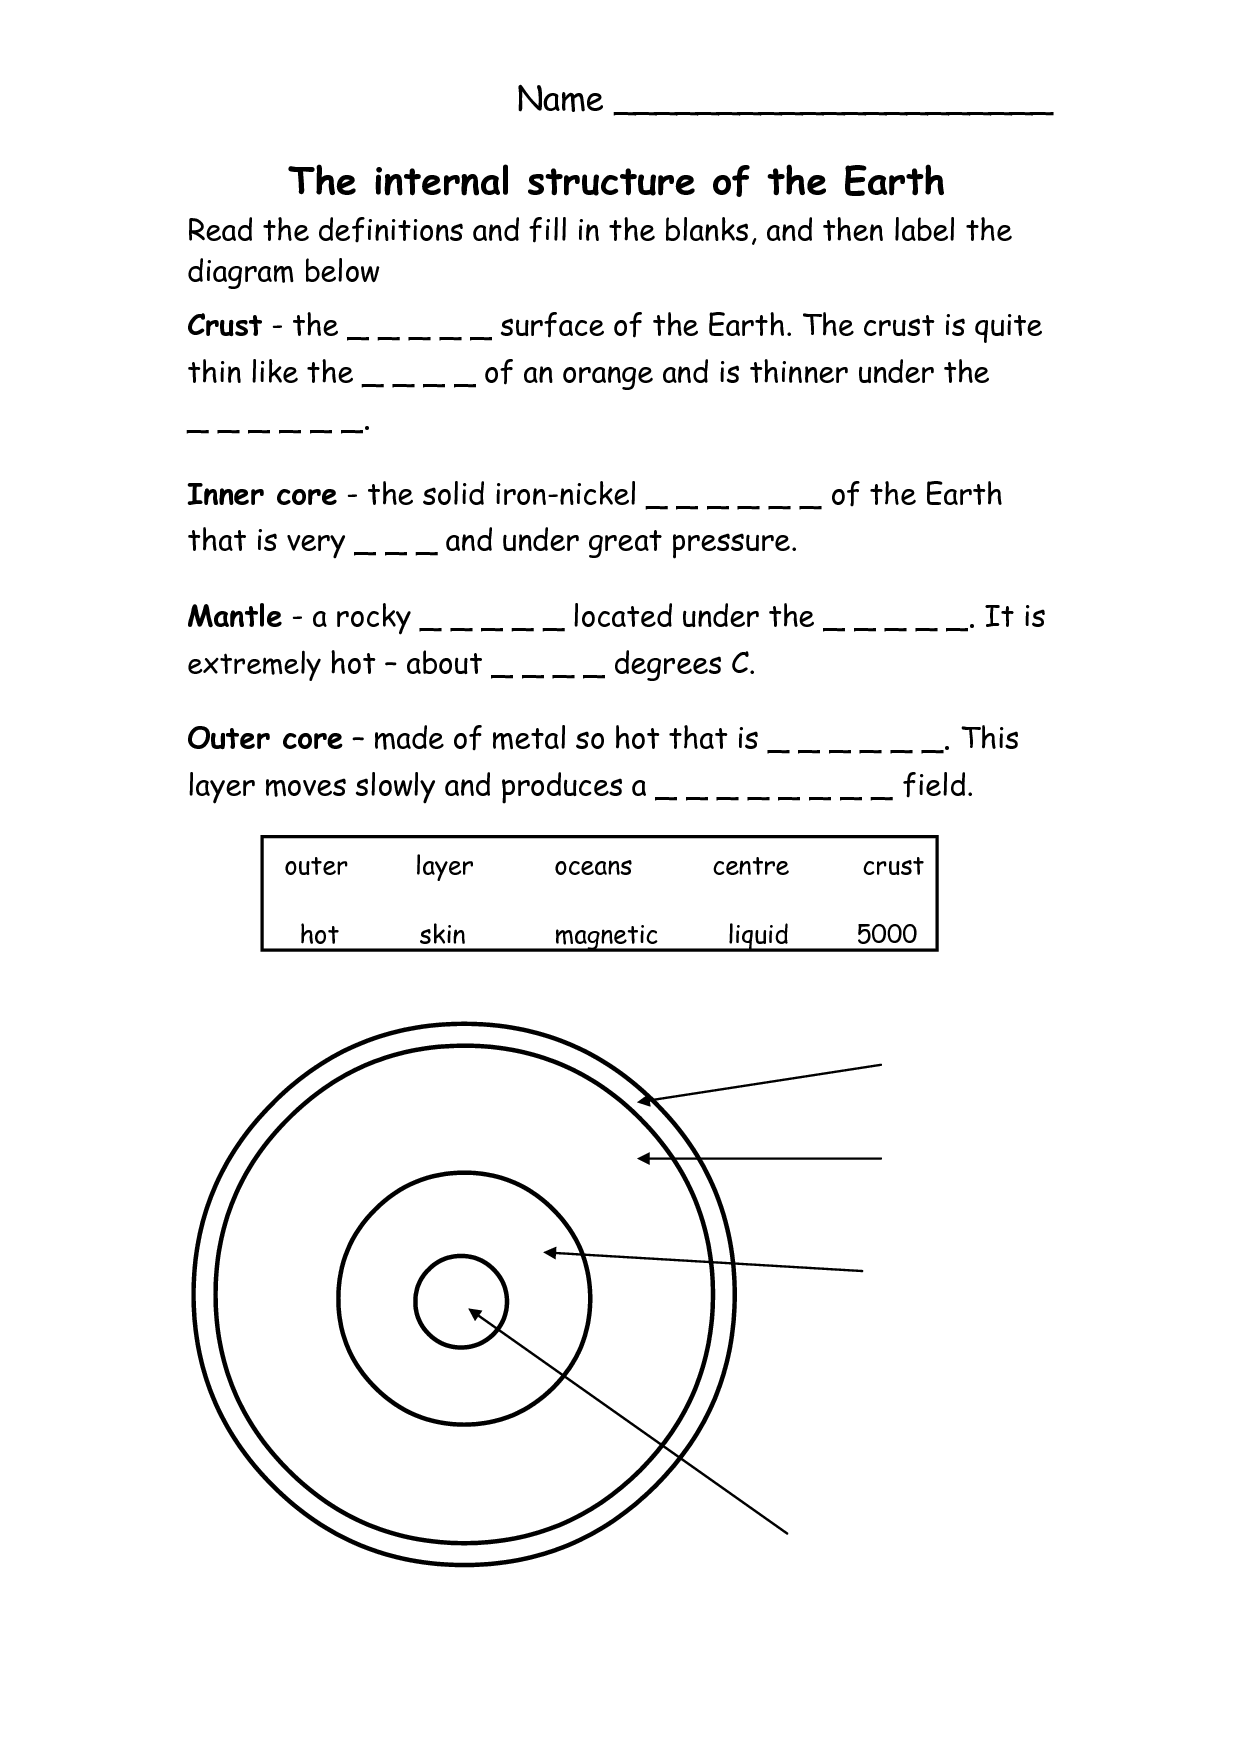 14 Best Images Of Worksheets Layers Of The Earth Earth s Layers Worksheet Planet Earth Layers